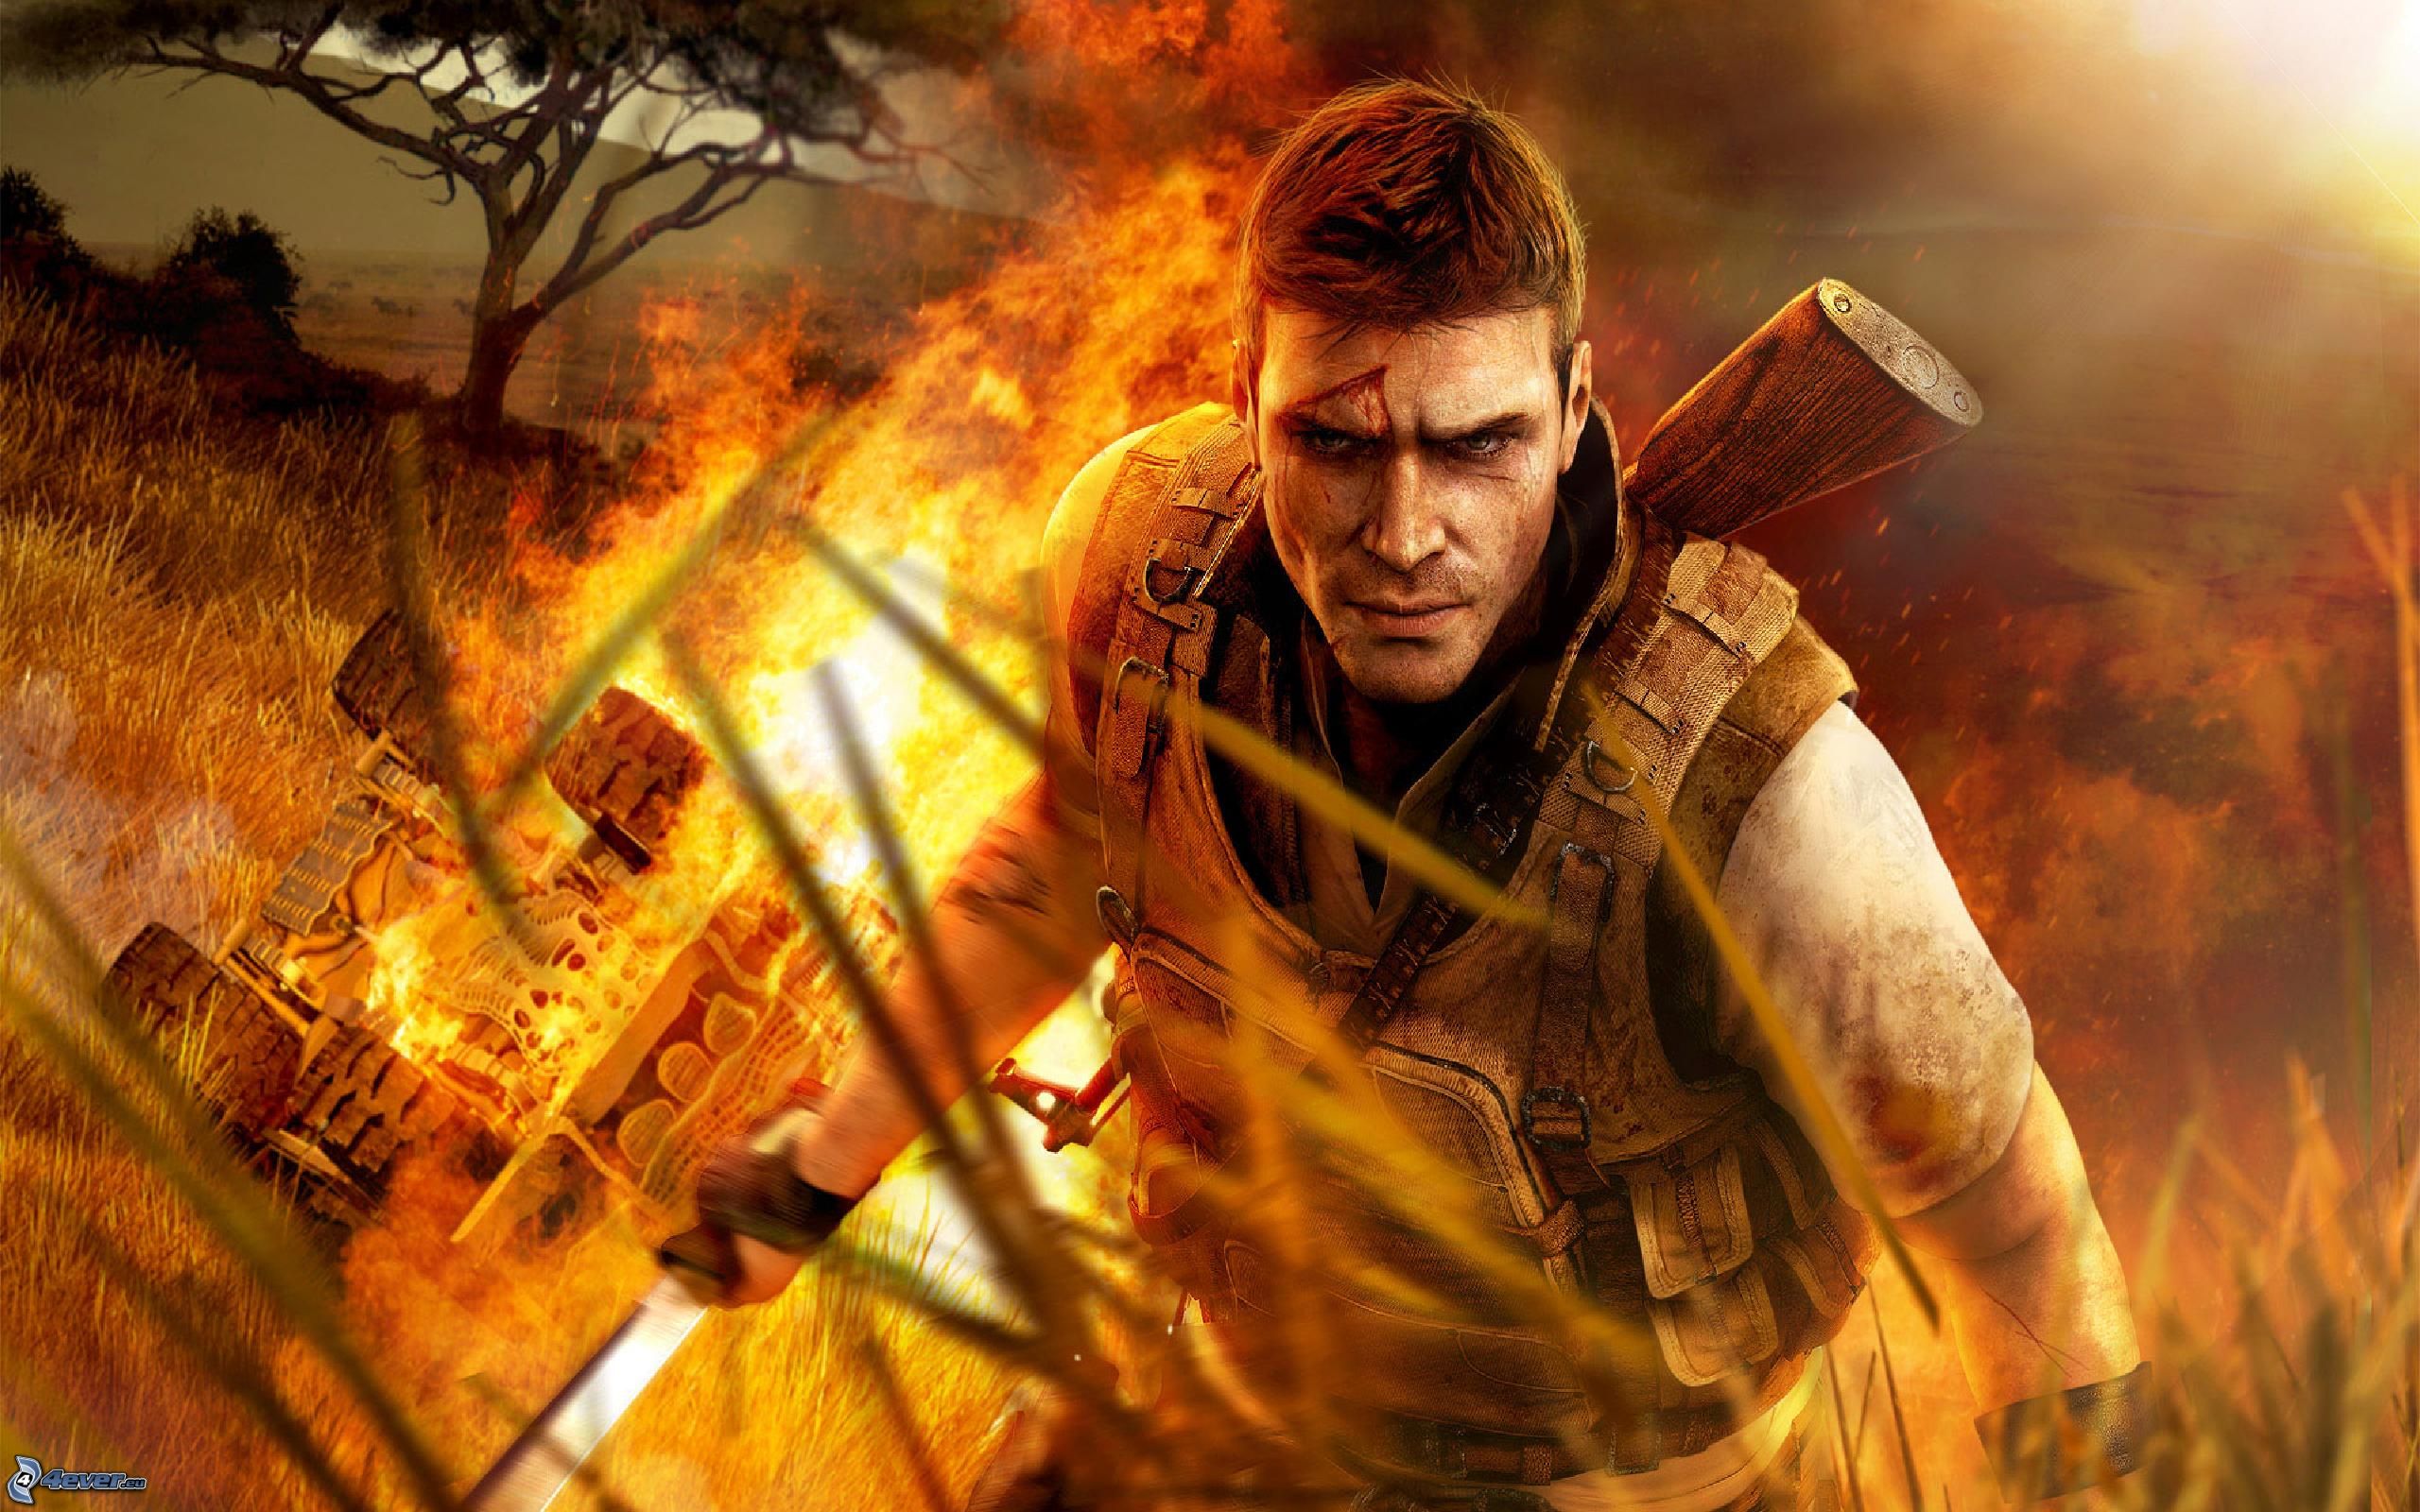 Far Cry 2 - Download